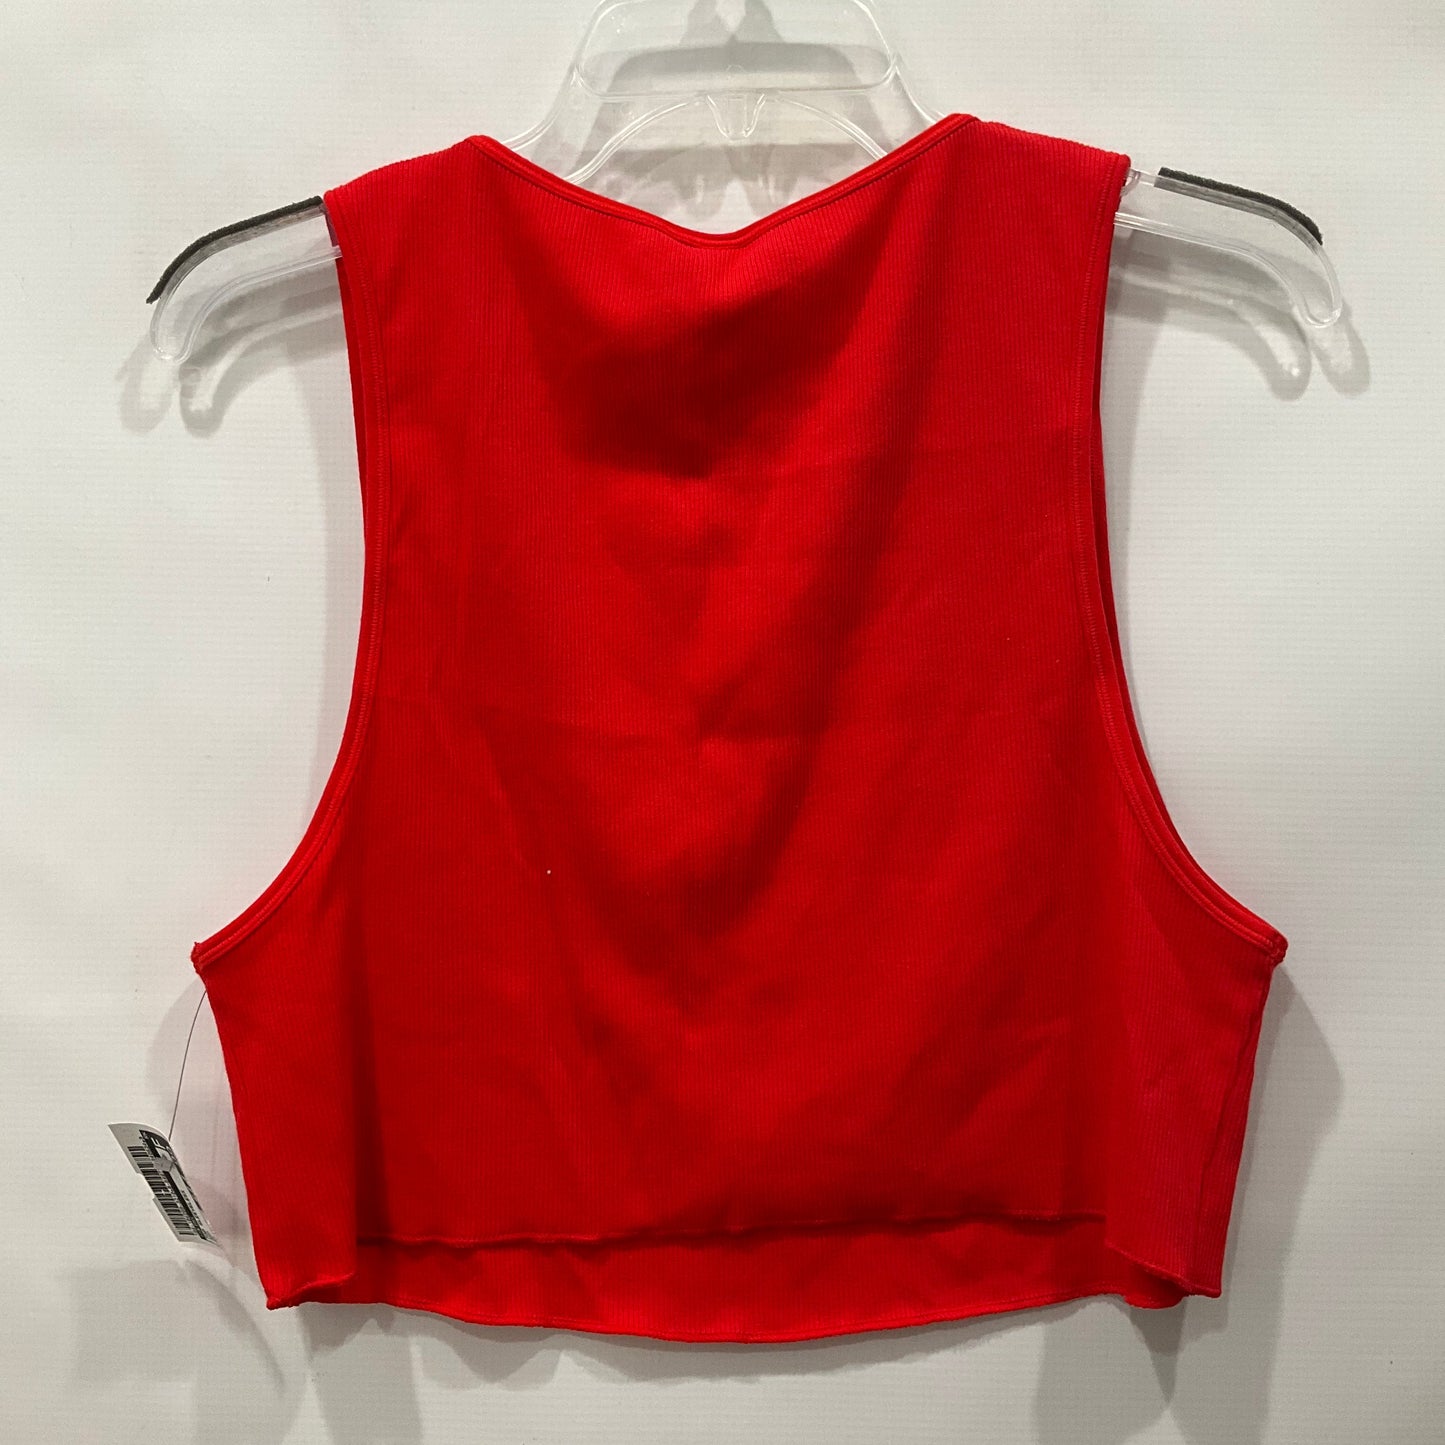 Red Top Sleeveless Skims, Size 3x